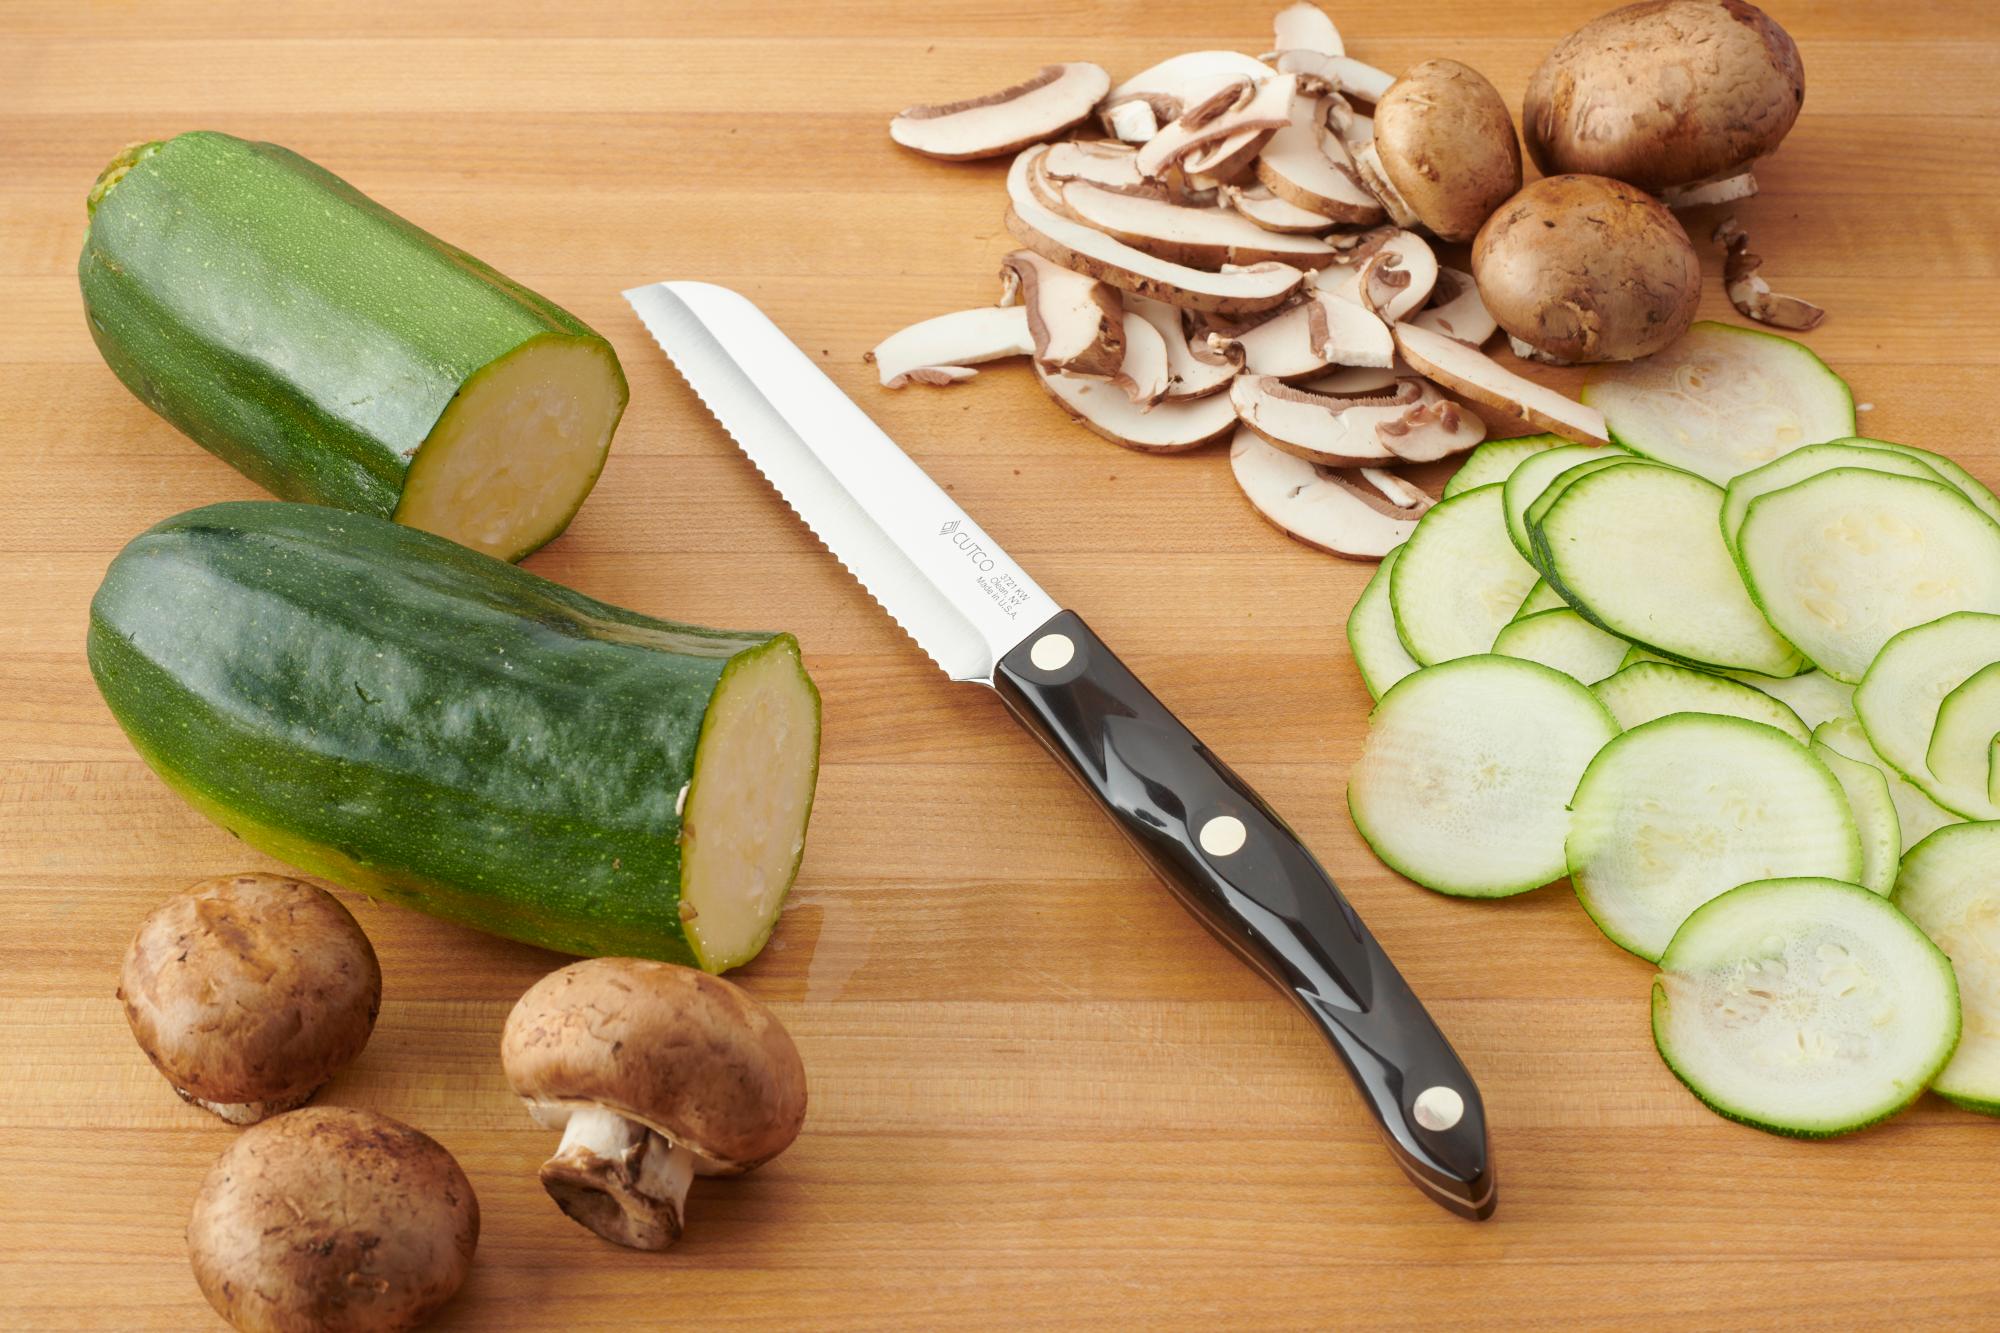 Slice the zucchini and mushrooms with a Santoku-Style Trimmer.